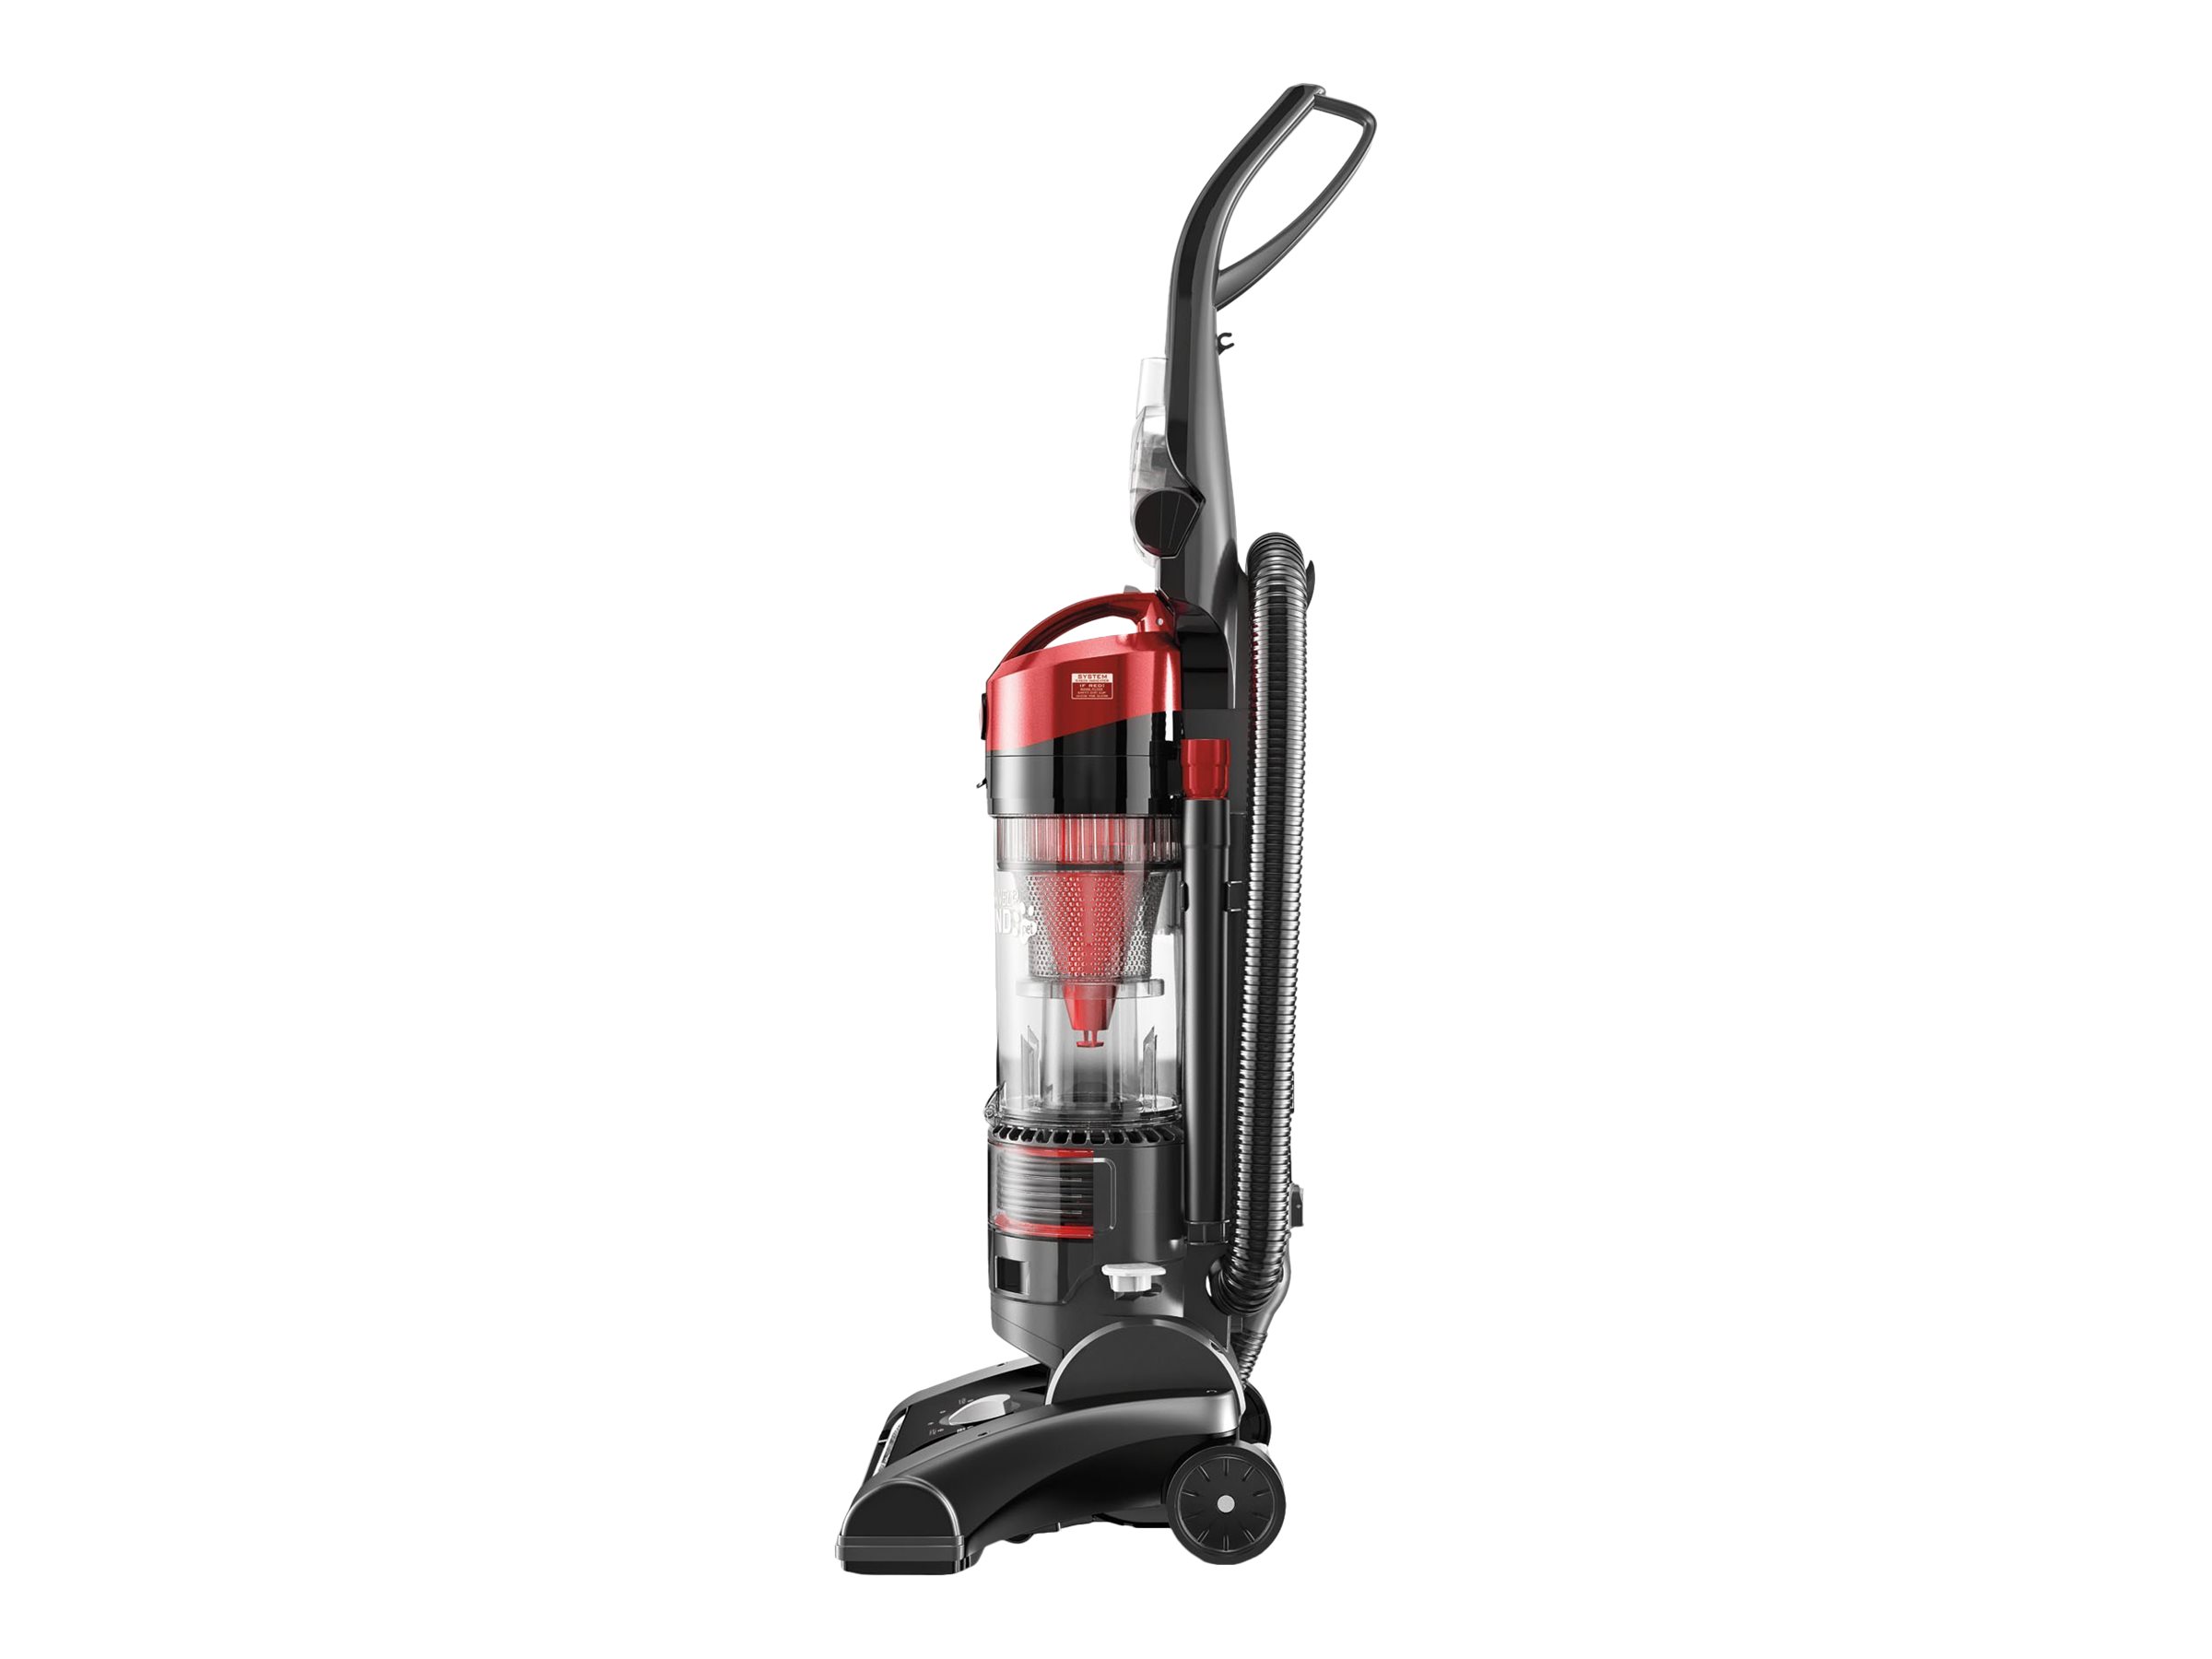 Hoover WindTunnel 2 Rewind Pet Upright Bagless Vacuum Cleaner, UH70830 - image 5 of 12